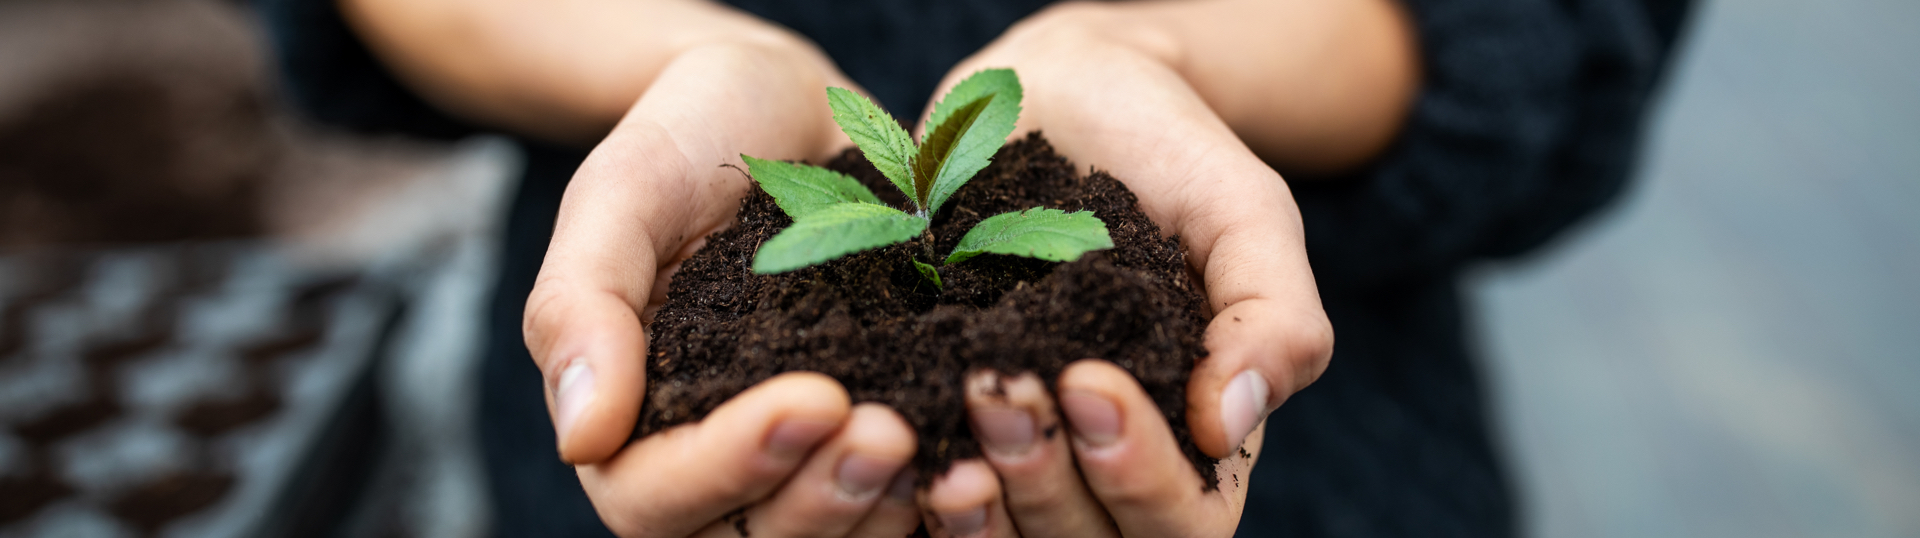 hands holding a plant in soil